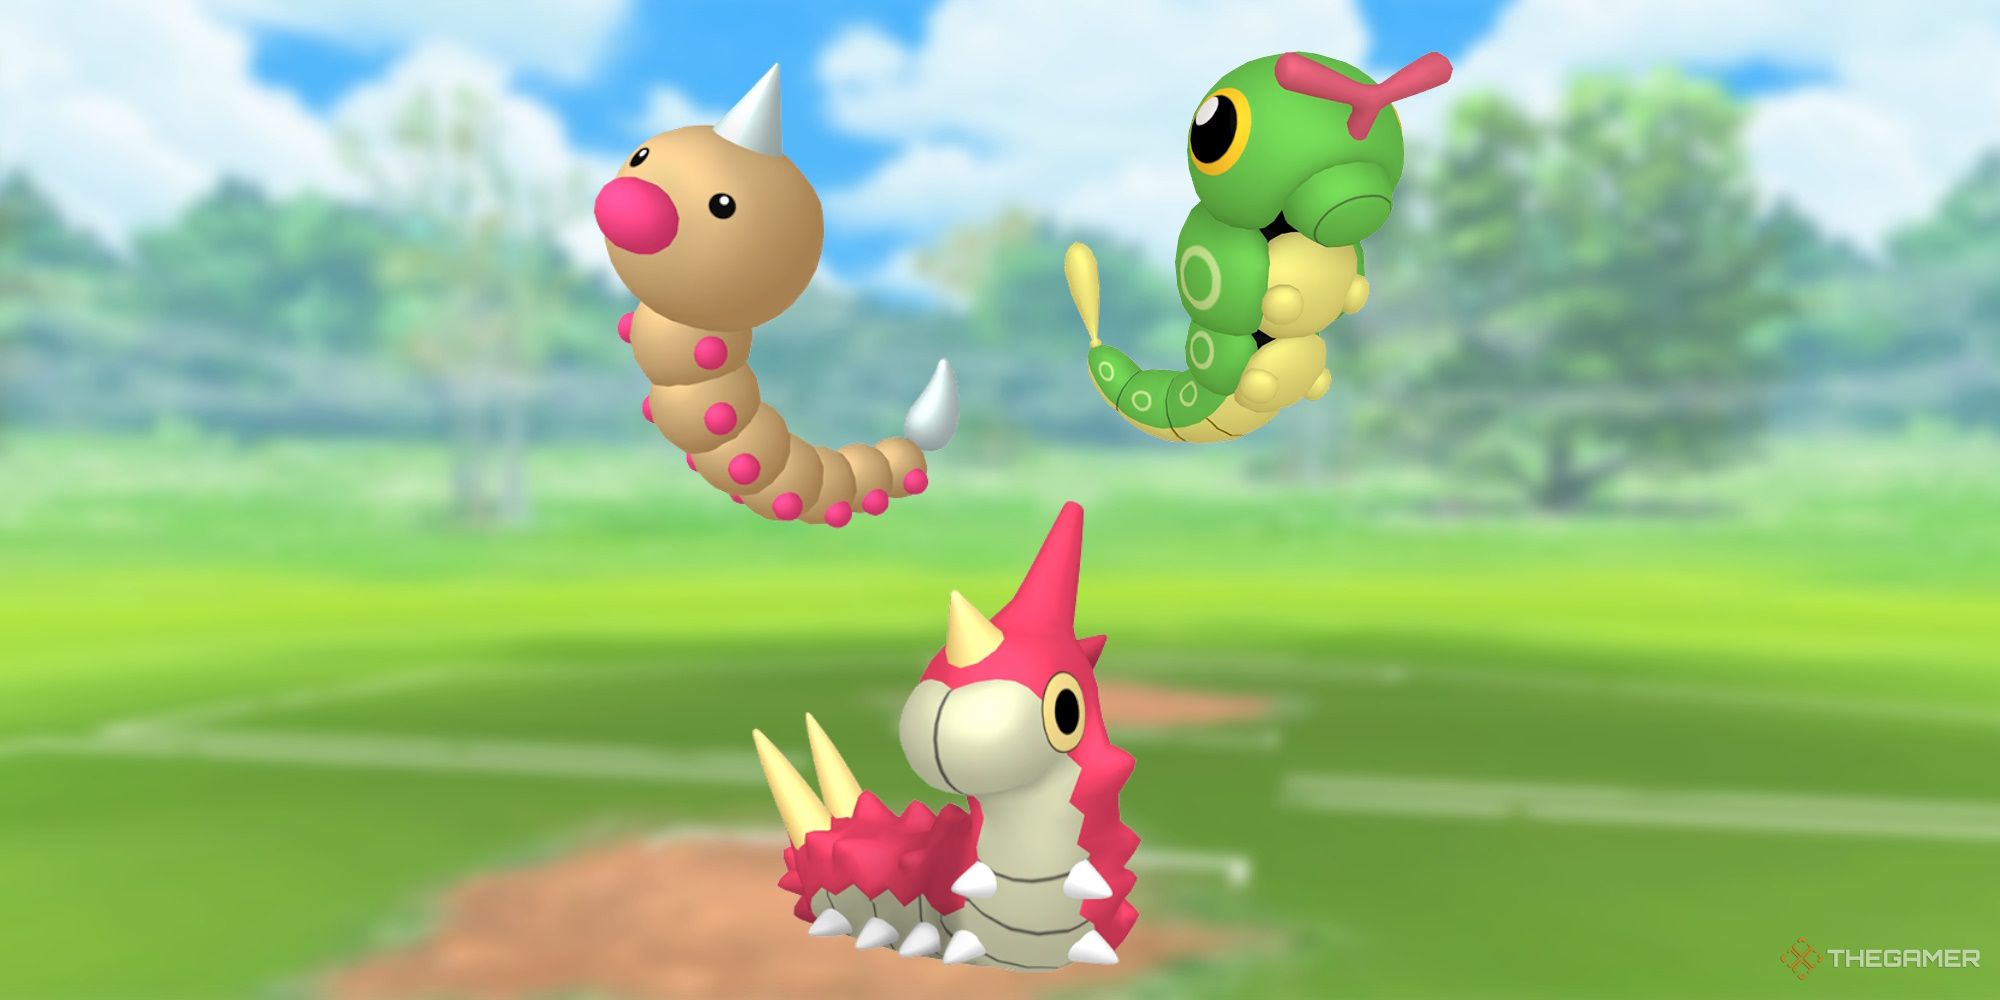 Weedle, Caterpie, and Wurmple with the Pokemon Go battlefield as the background